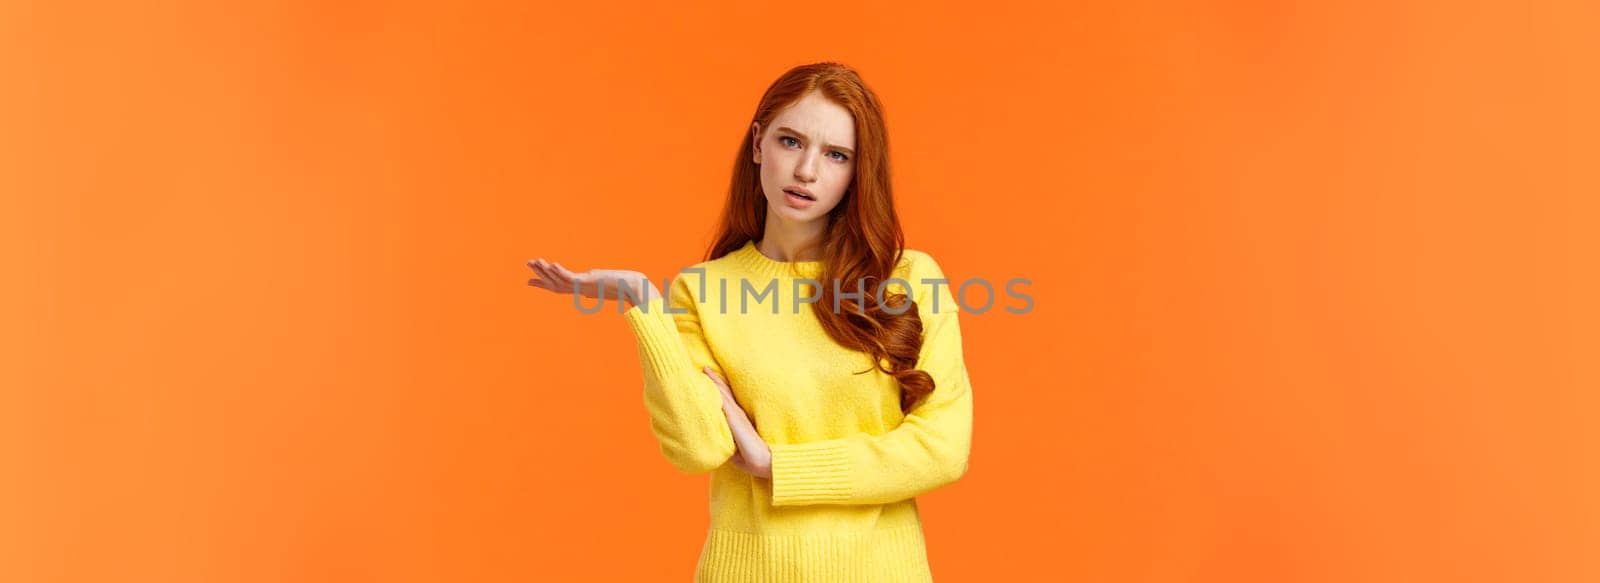 Skeptical and troubled, uncertain young redhead woman cant understand how resolve proble, shrugging raise hands sideways, frowning confused or unsure, standing frustrated orange background by Benzoix